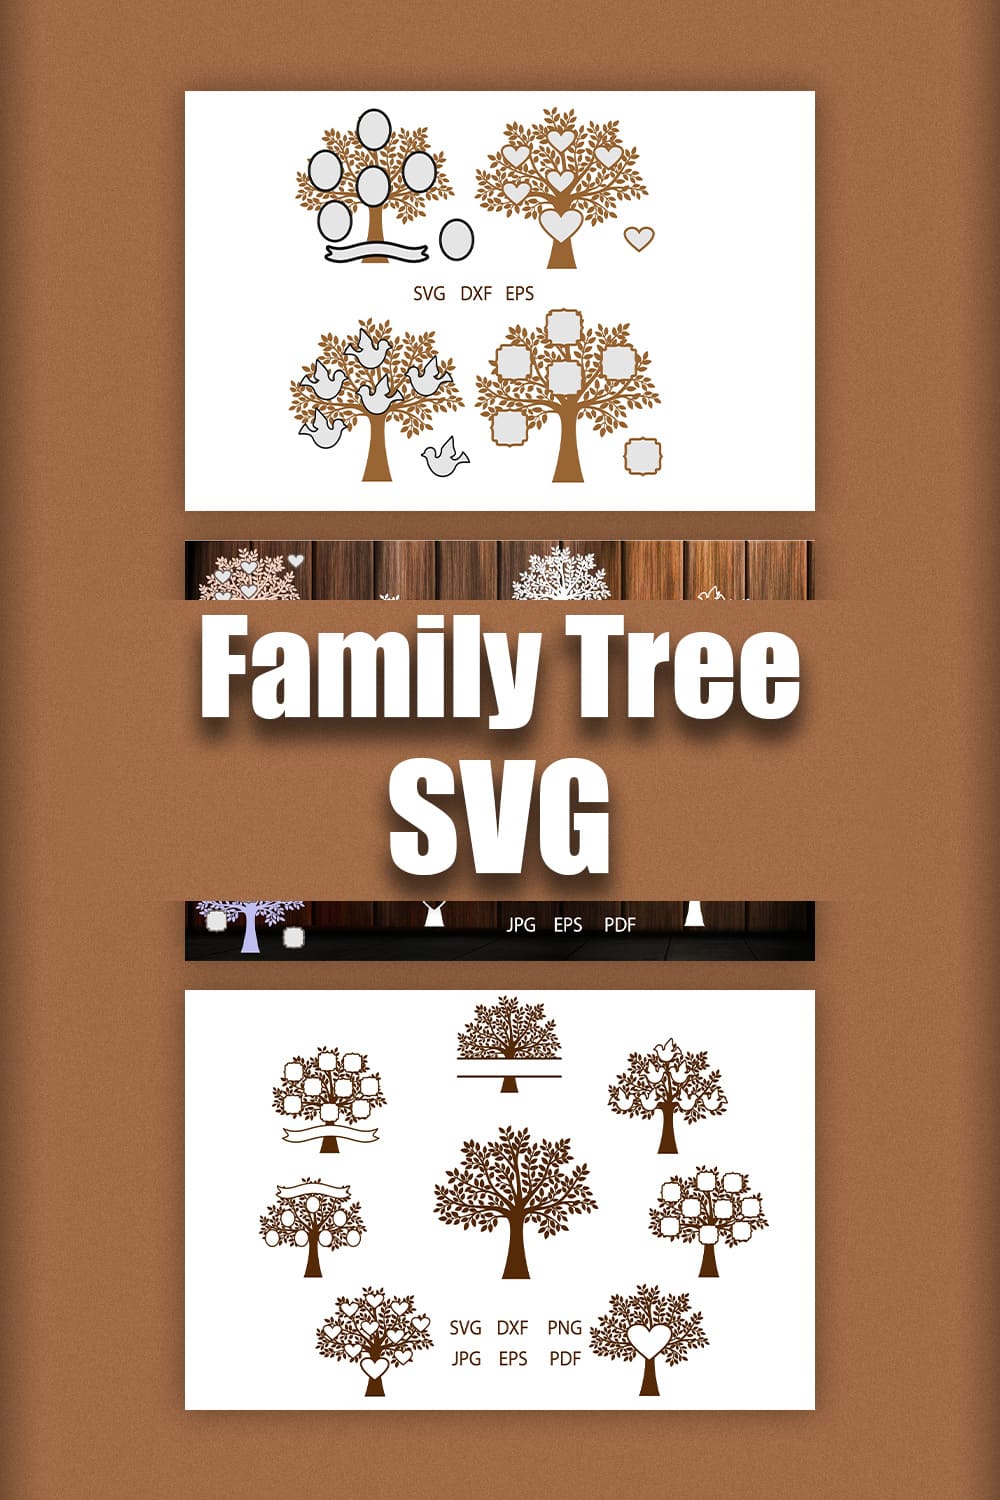 Family Tree SVG preview of Pinterest image.